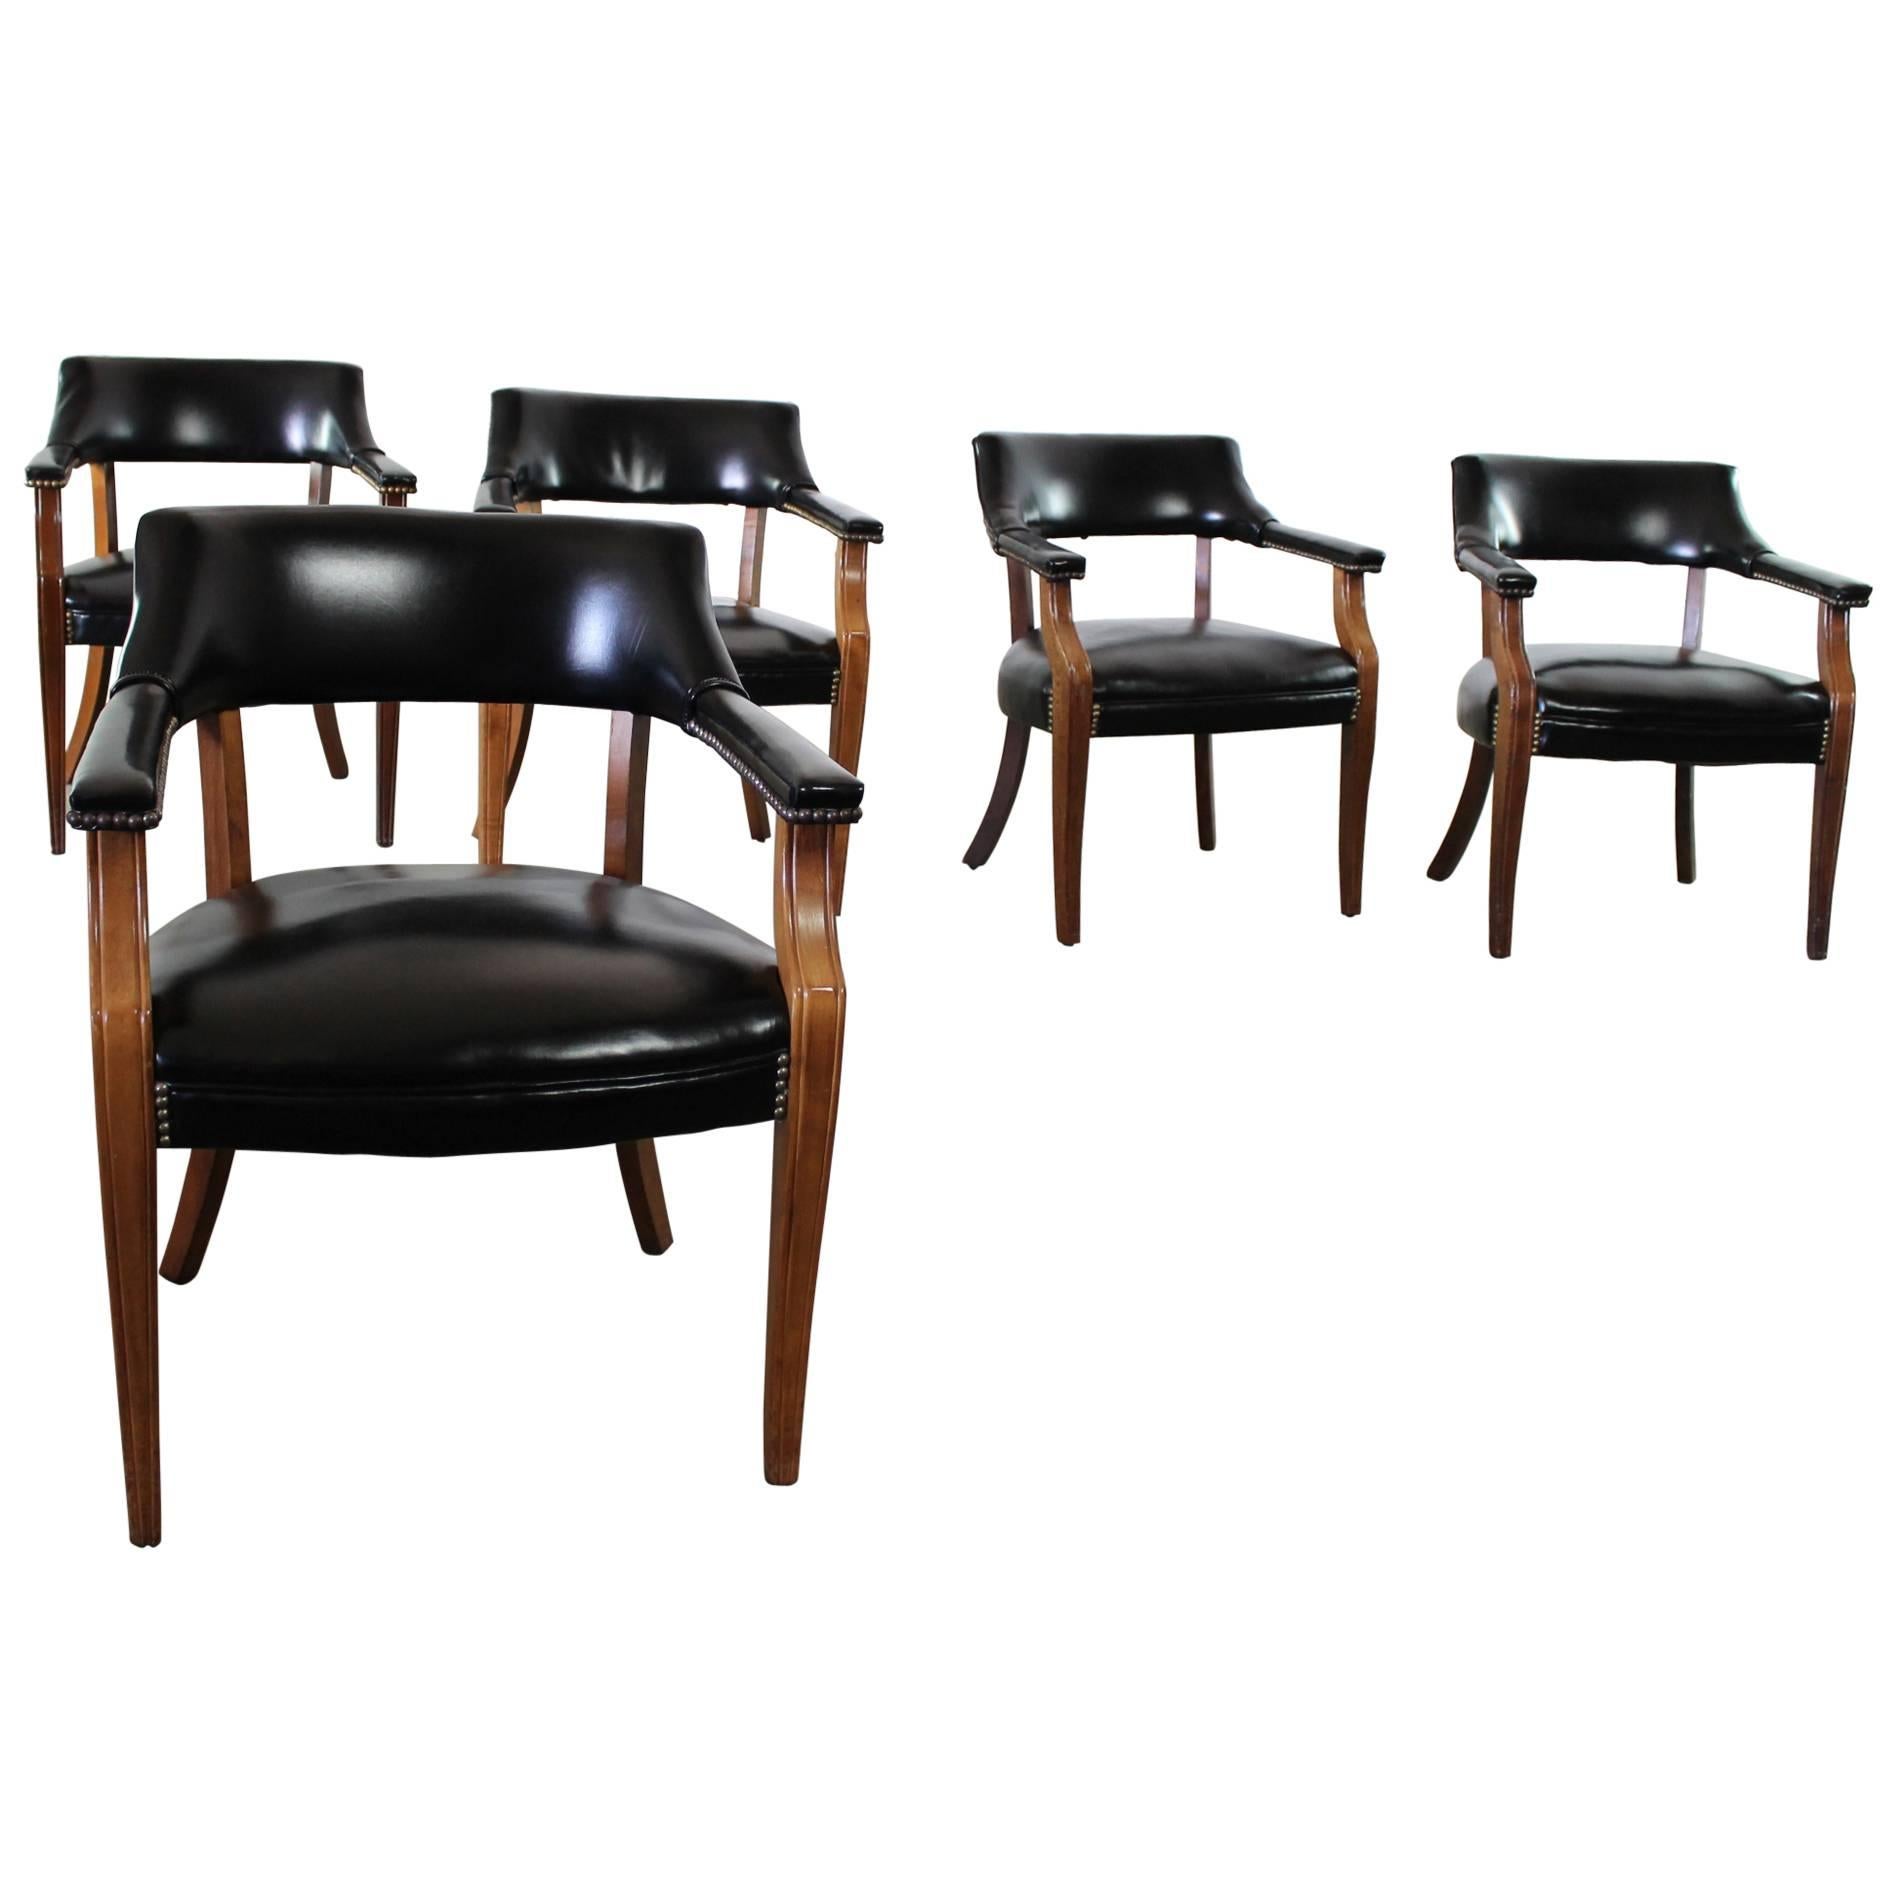 Vintage Walnut and Black Faux Leather Captain Chairs with Nailhead Detail